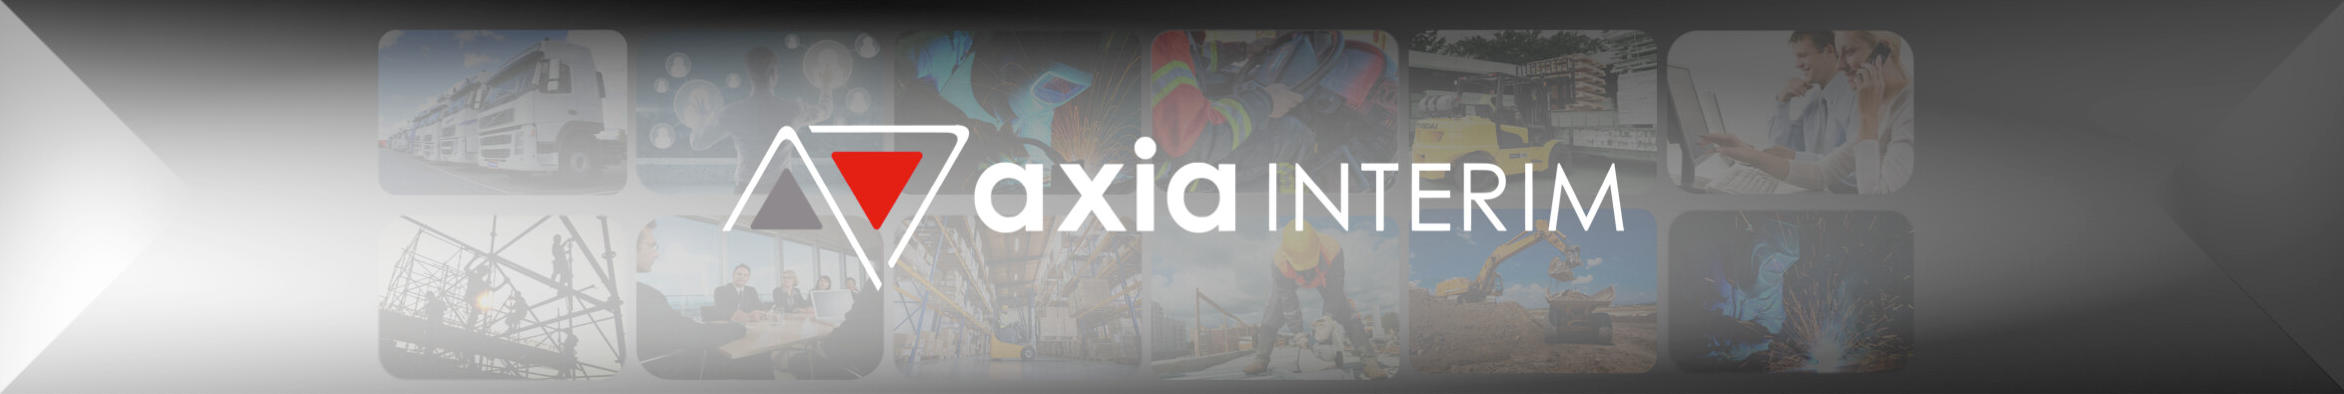 Axia Interim - Agence Belval background